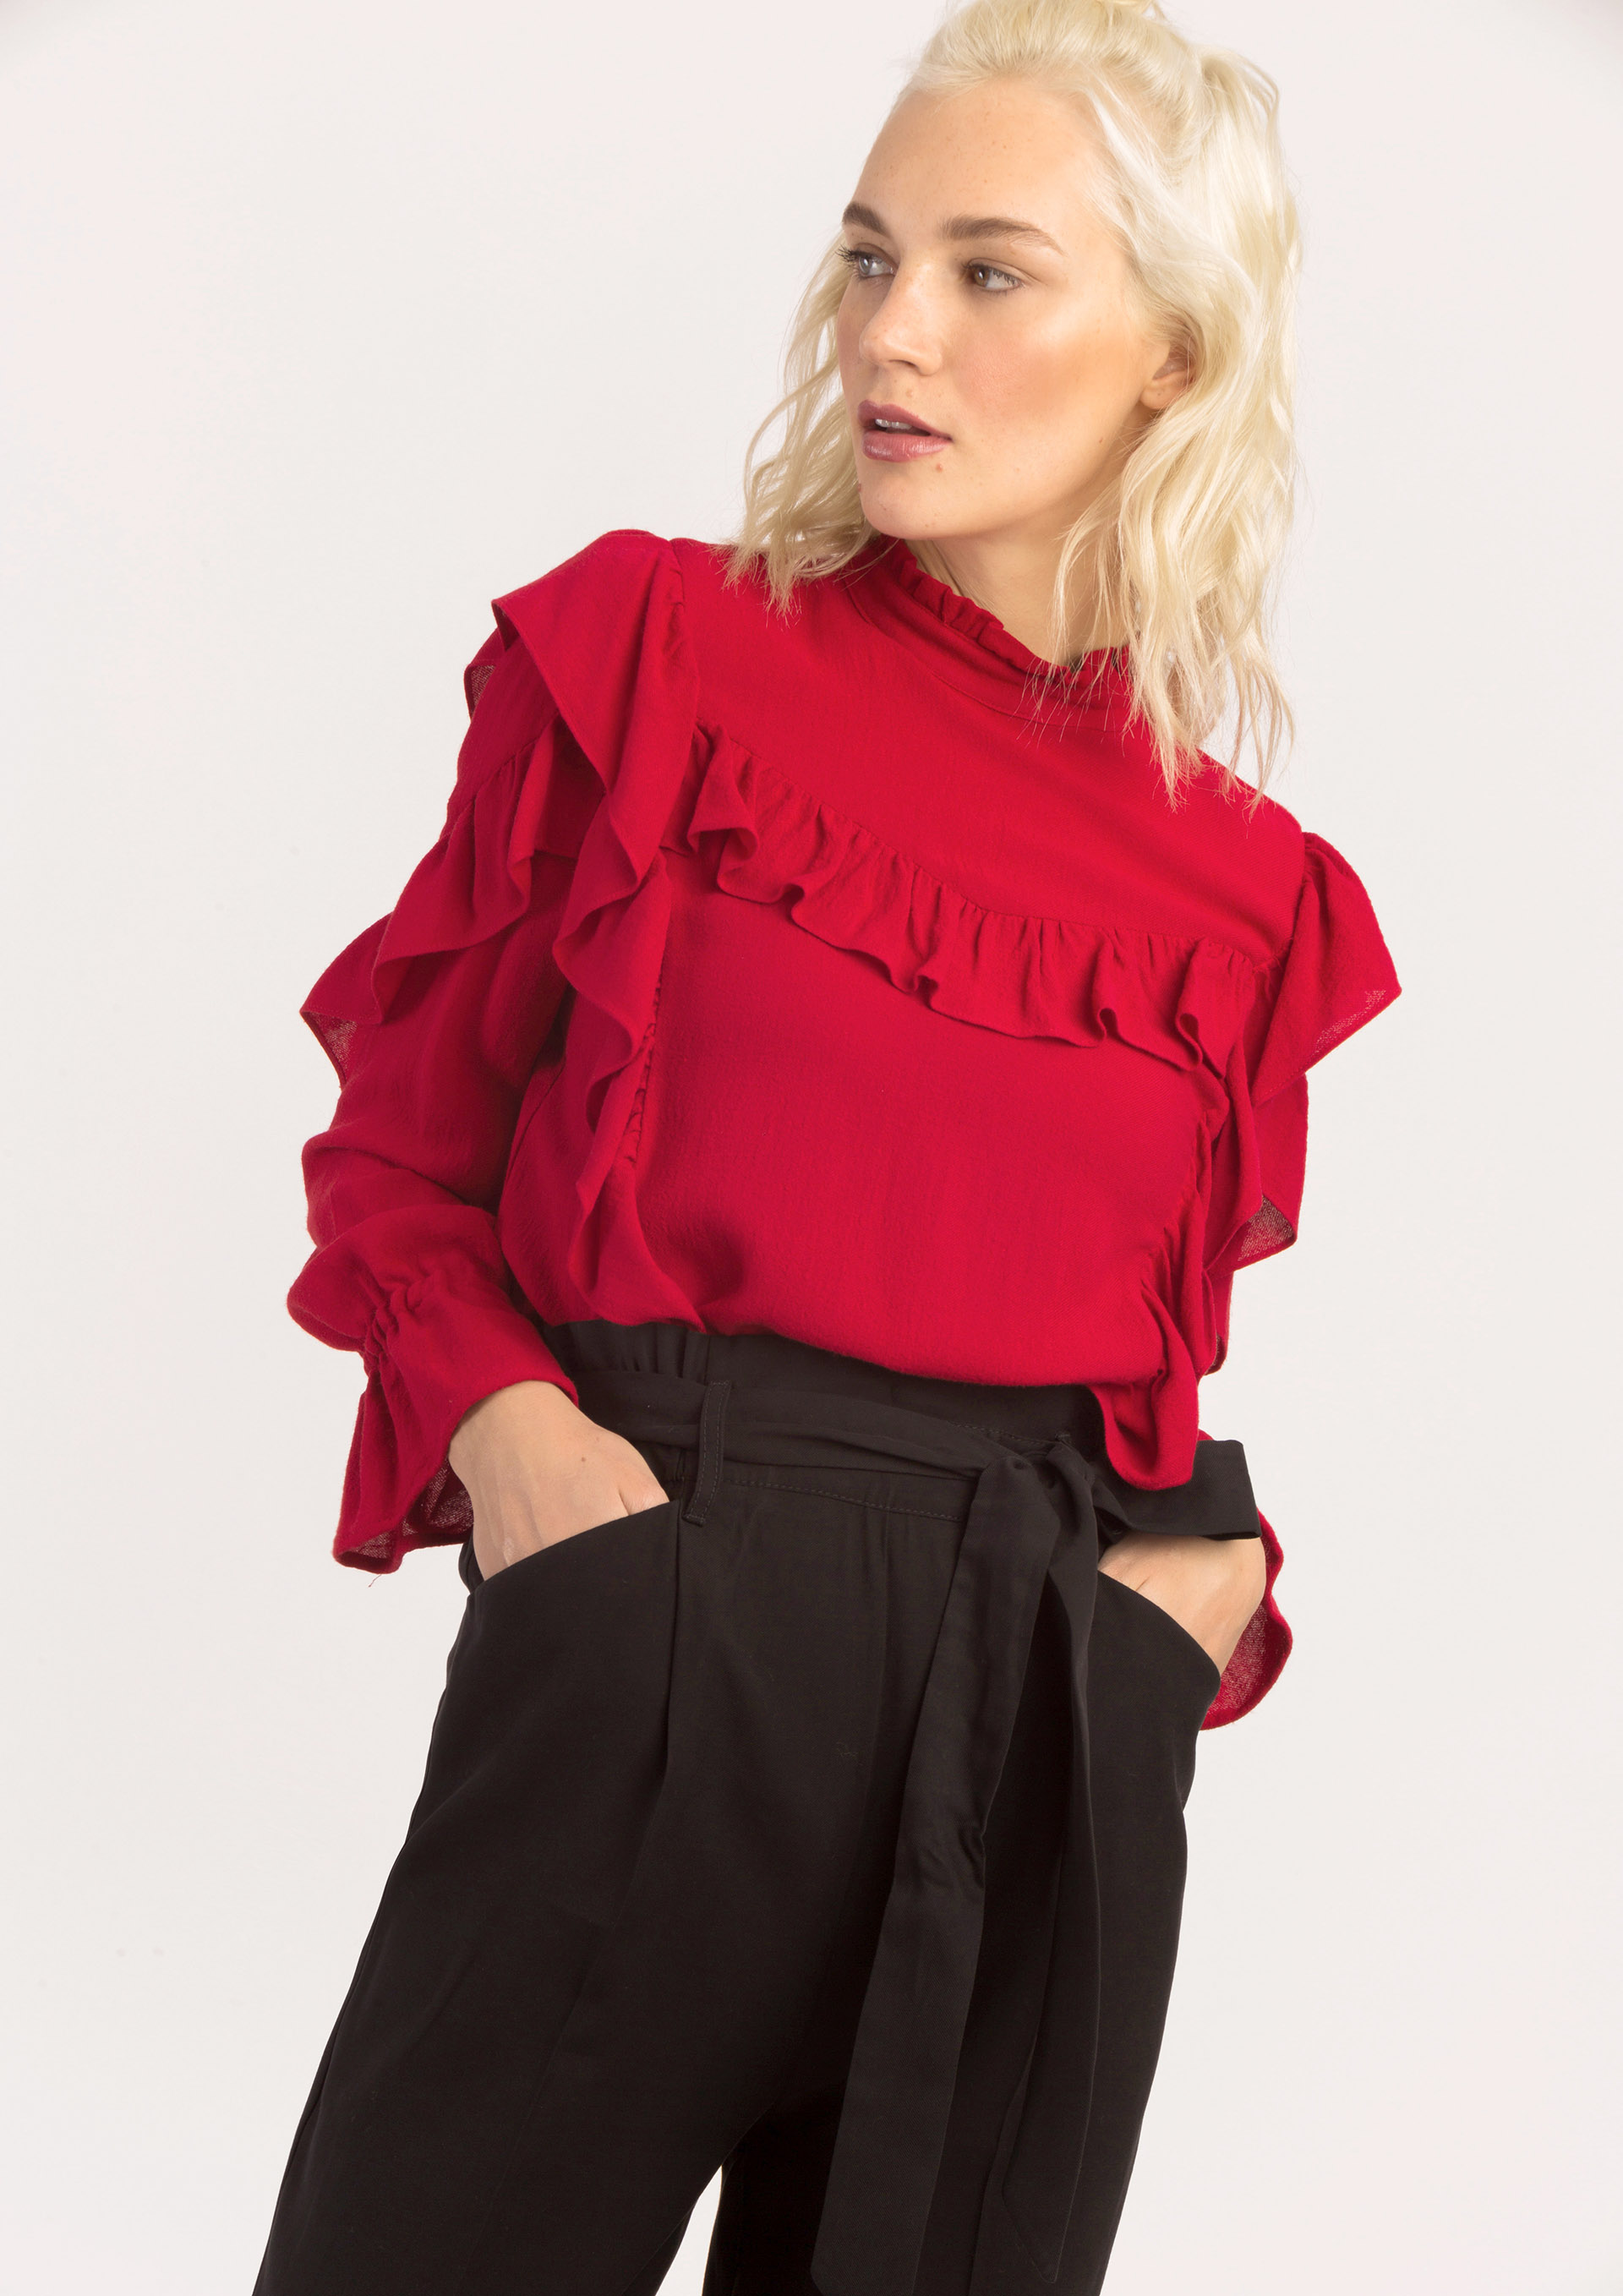 Red blouse with frills.